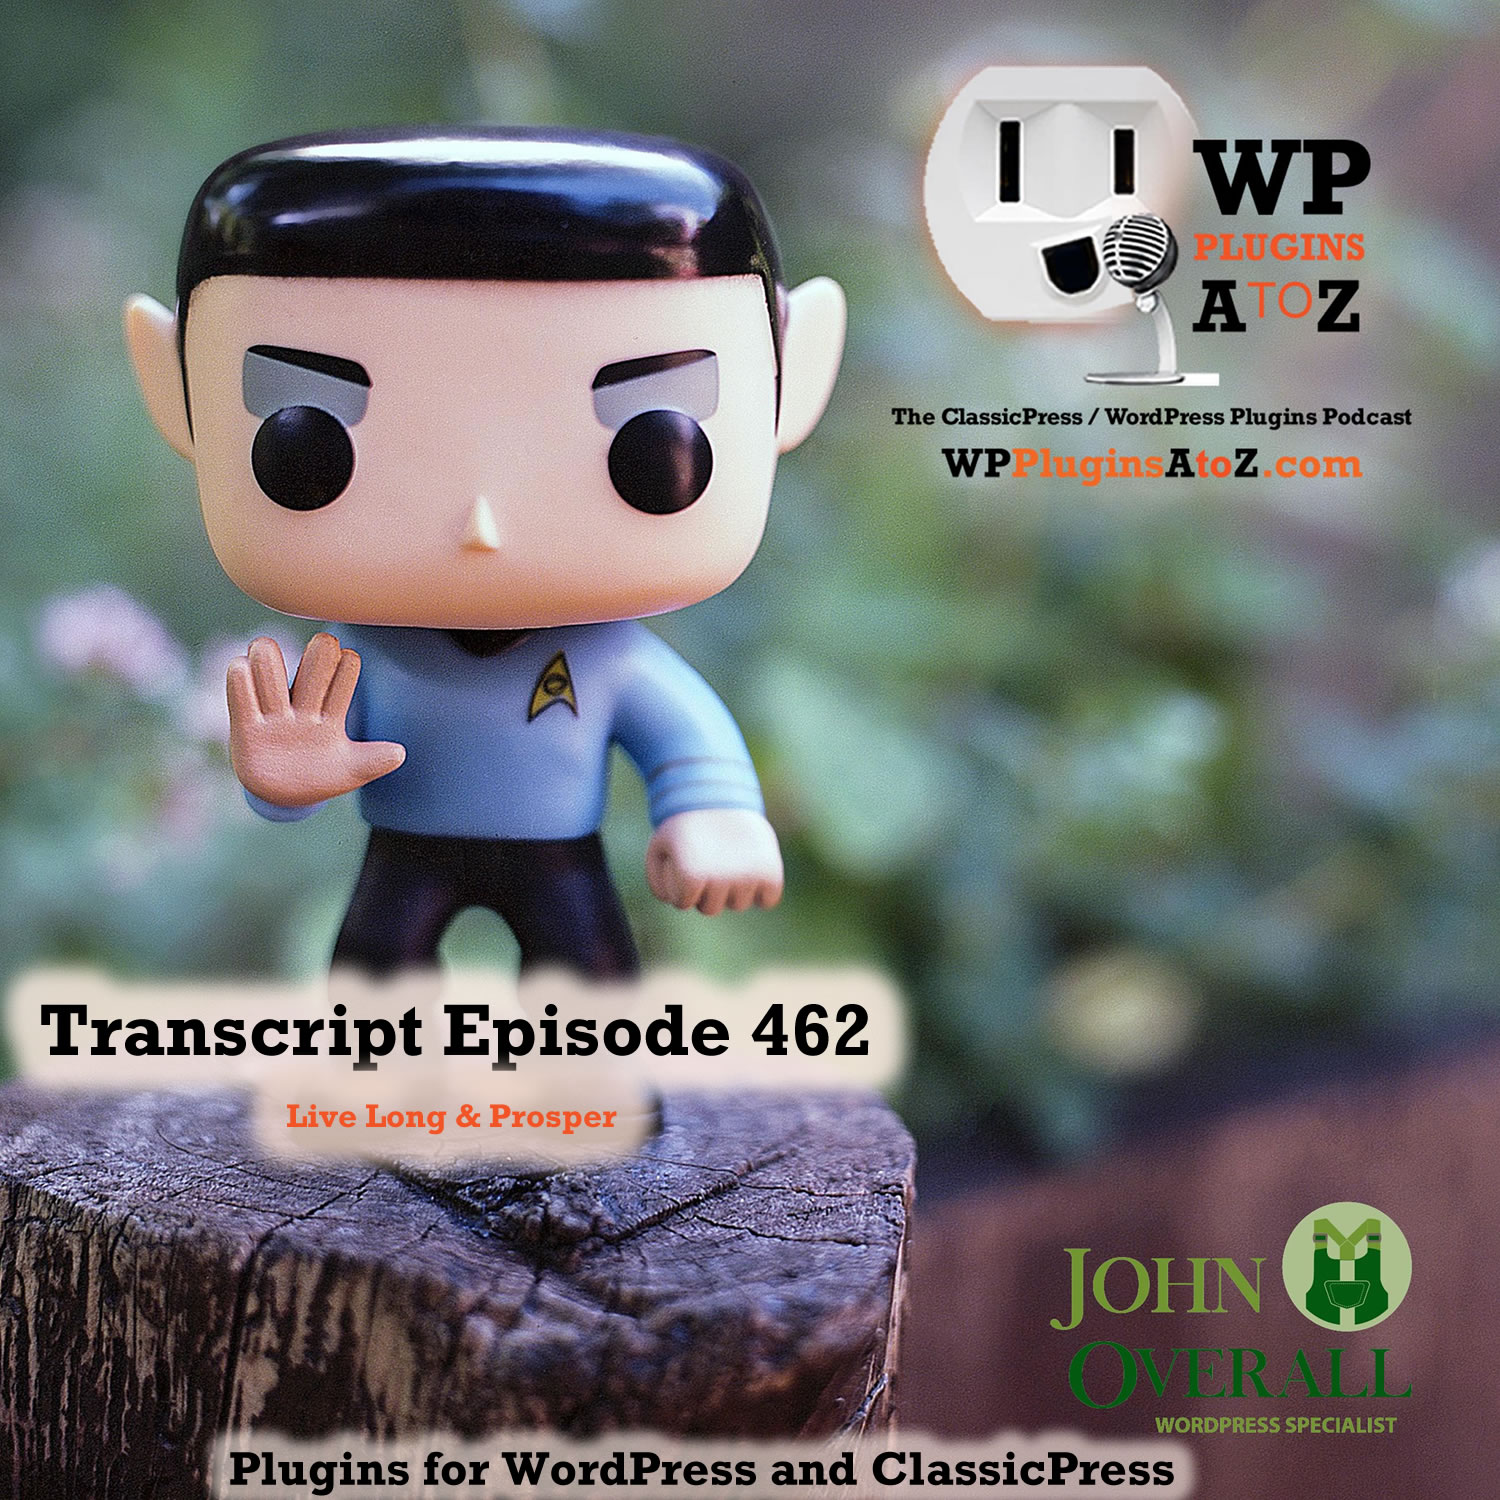 It's Episode 462 with plugins for Deleting Items, Re-Ordering Your Life, Removing those Attachments and ClassicPress Options. It's all coming up on WordPress Plugins A-Z!